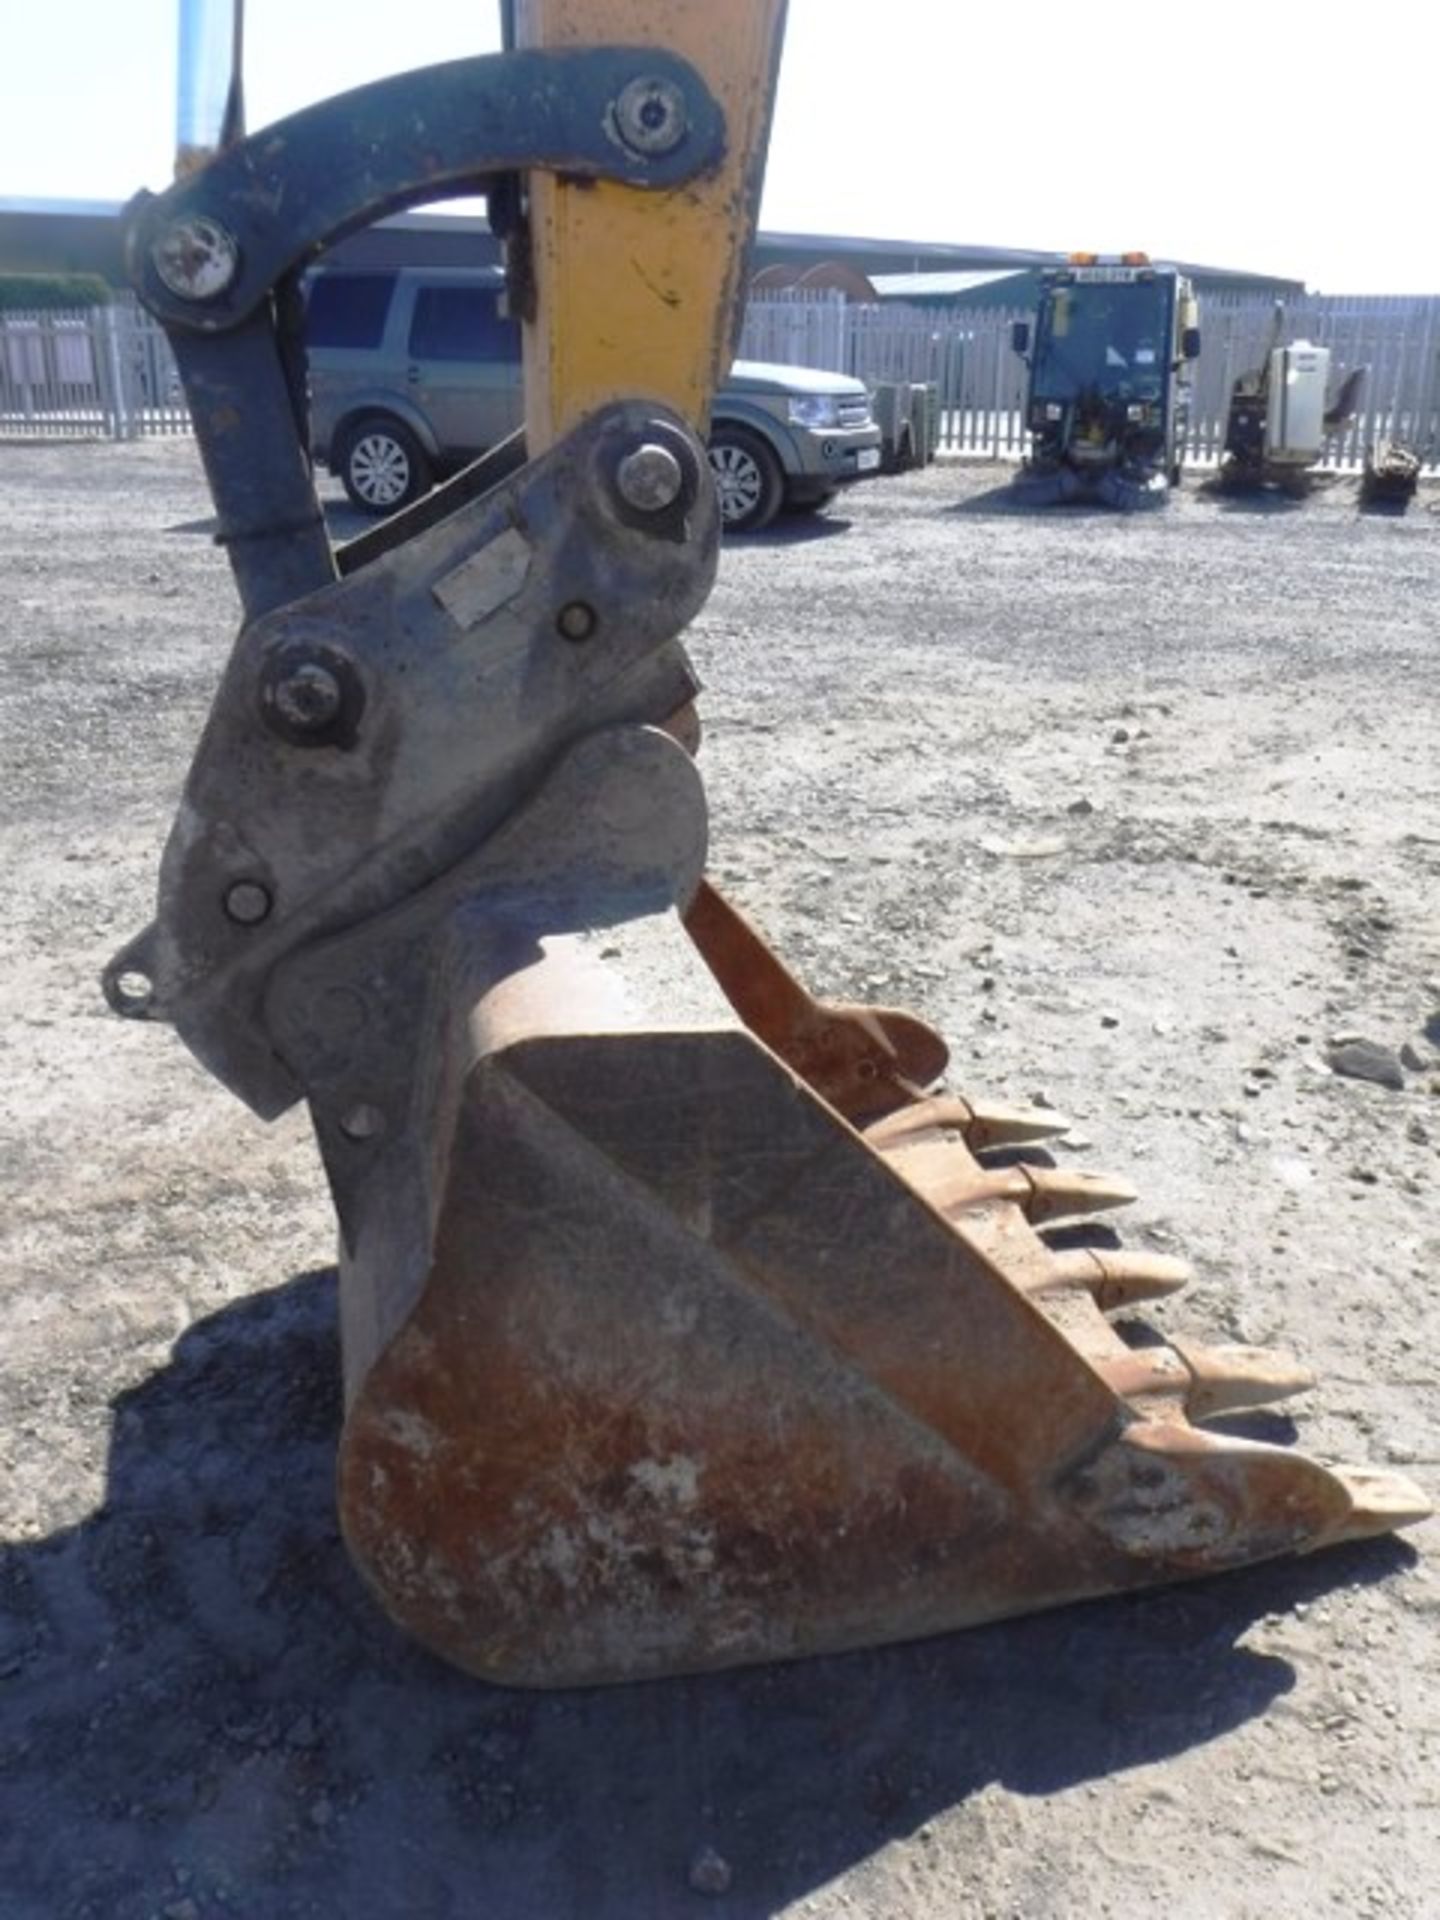 2014 HYUNDAI 145-9A excavator c/w 1 bucket. Short body version ideal for site work. s/n 068. 4263hr - Image 32 of 32